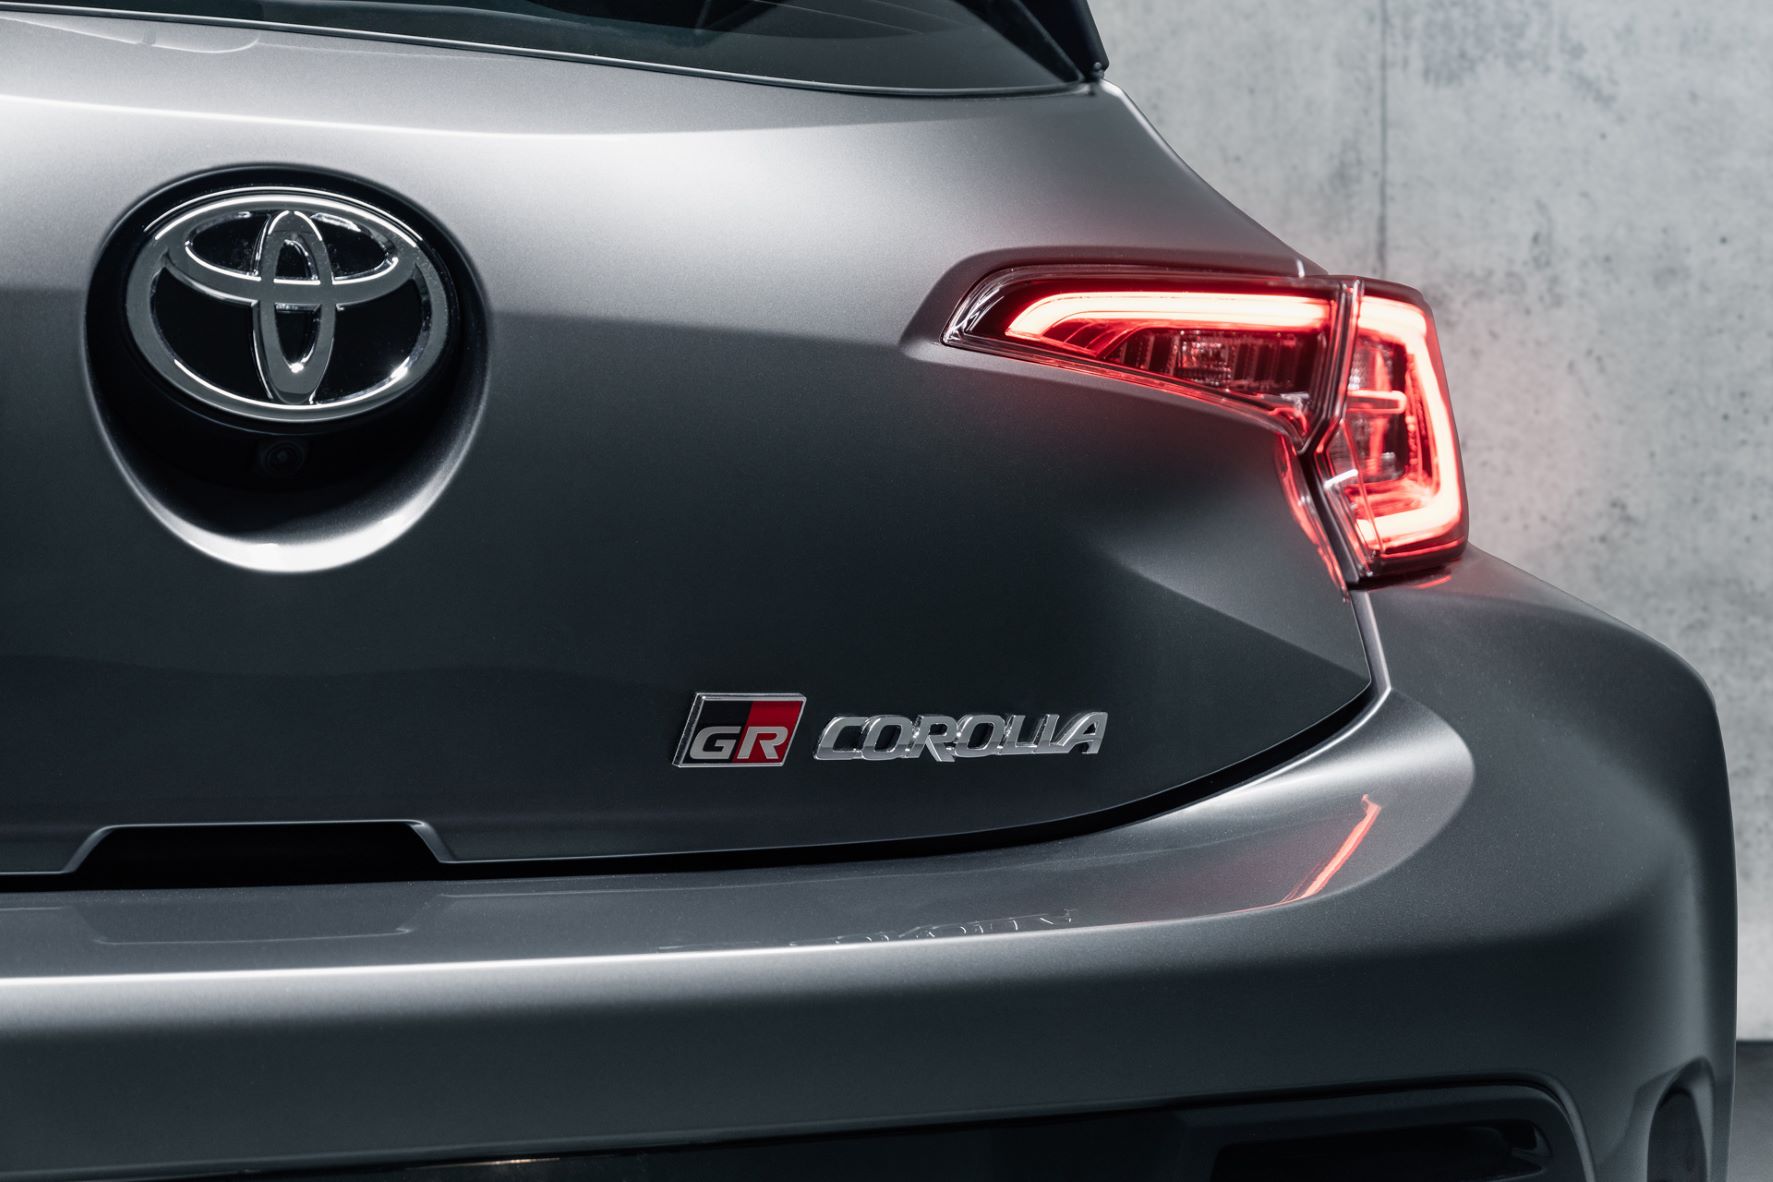 Rear close-up of the Toyota GR Corolla badging